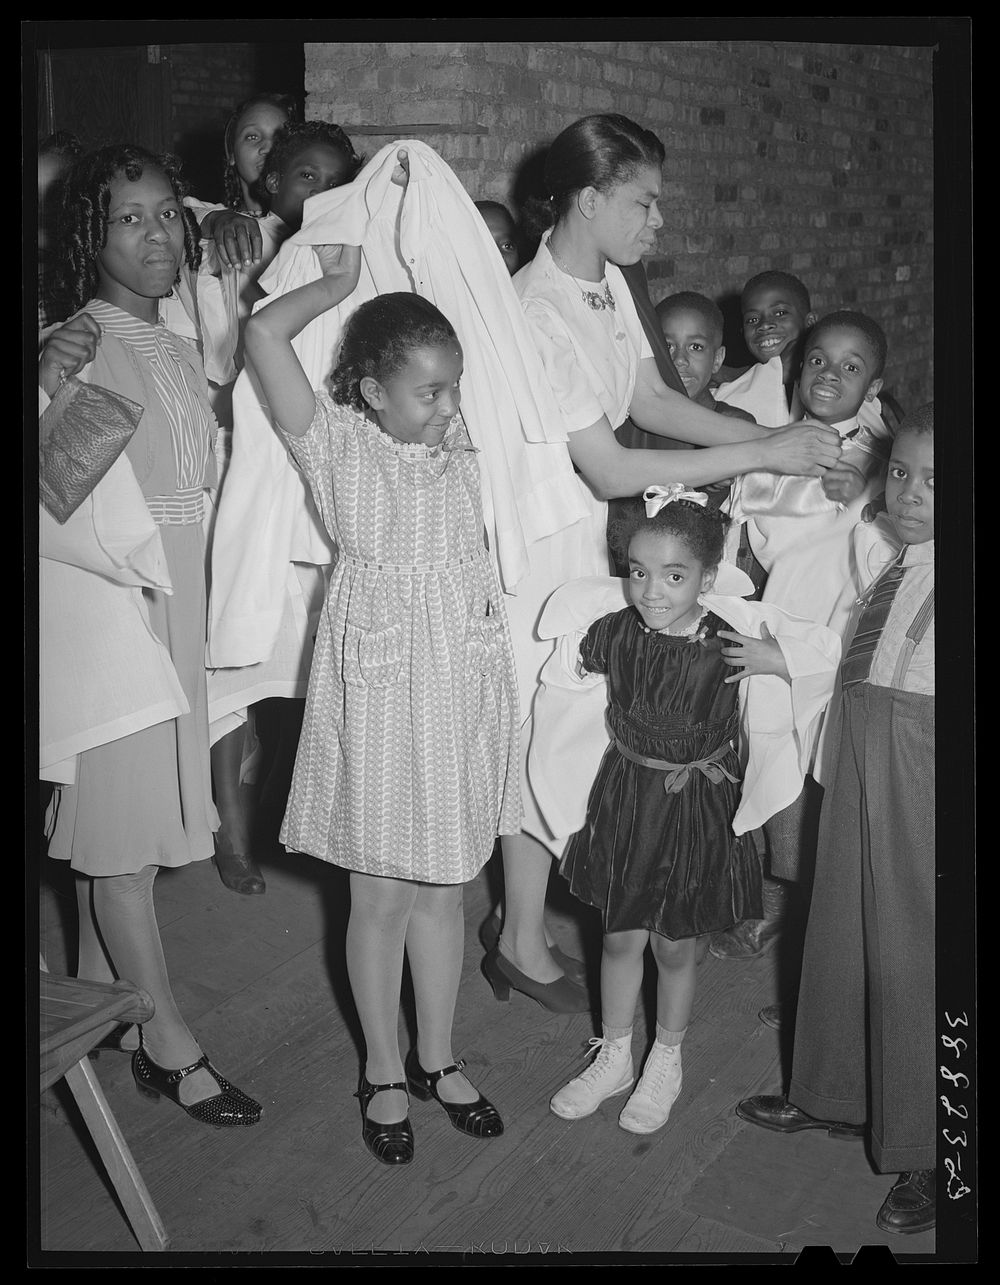 Children putting on choir robes. Pentecostal church. Chicago, Illinois by Russell Lee